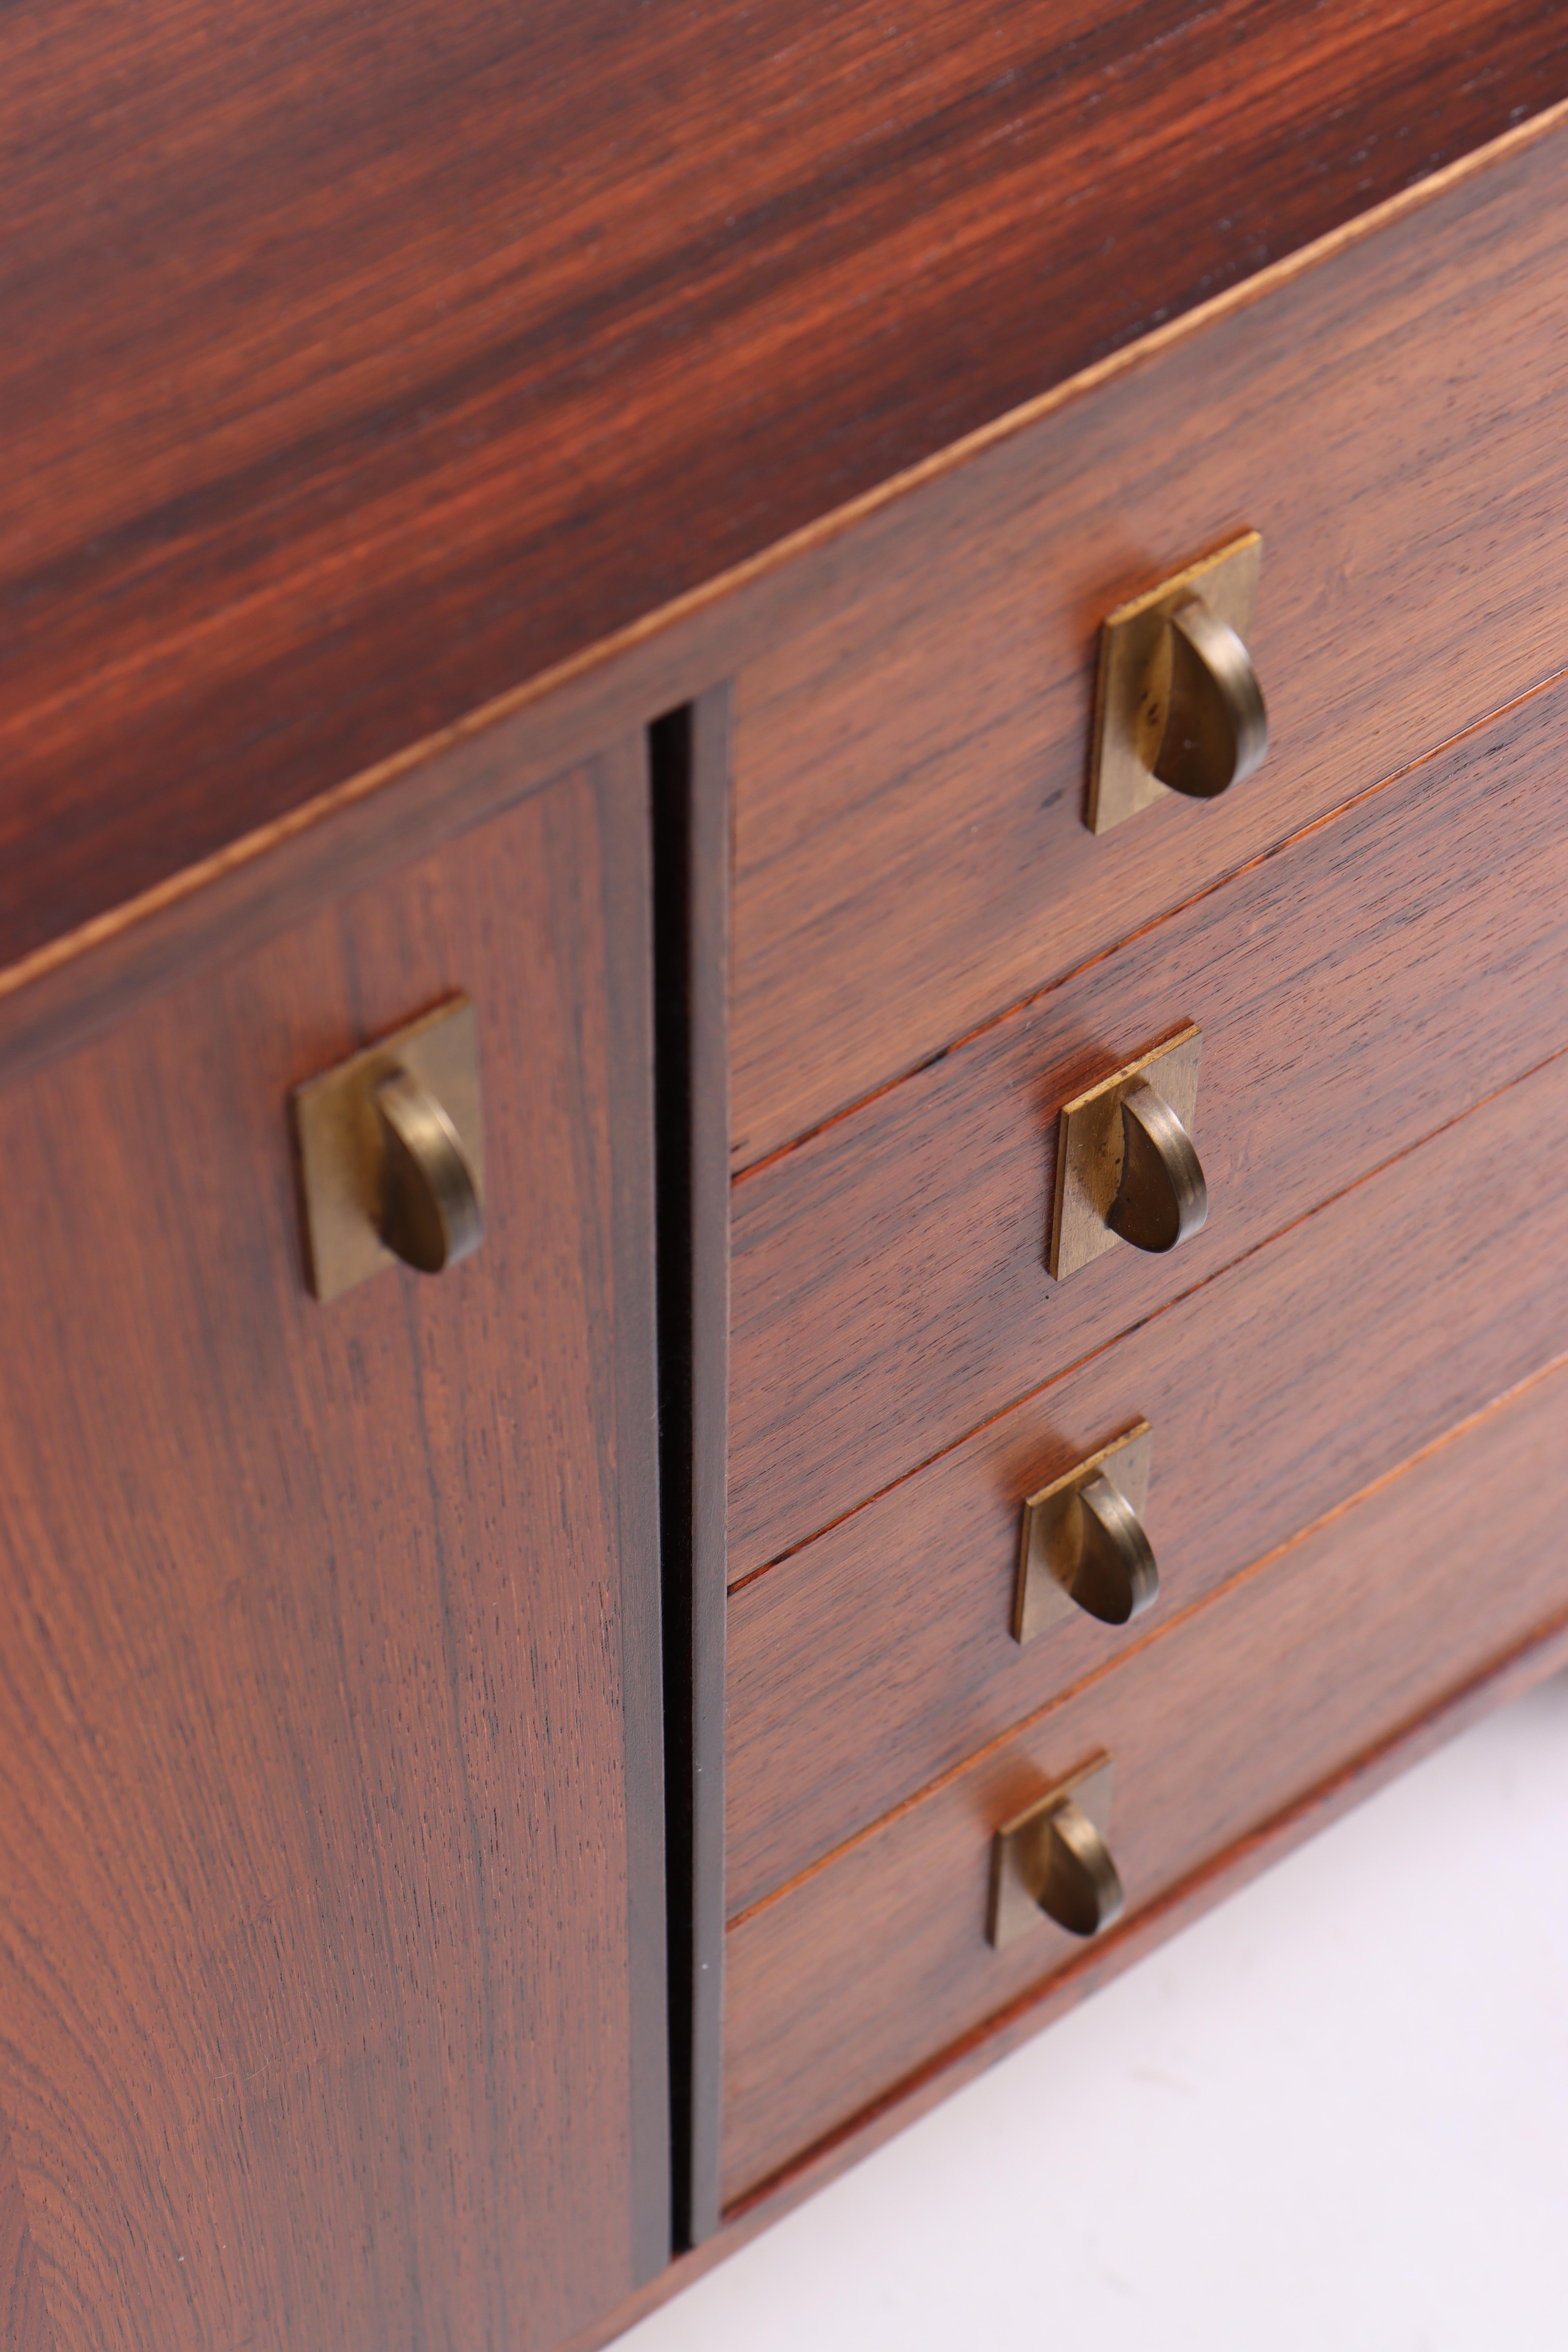 Danish Midcentury Low Cabinet in Rosewood with Brass Hardware by Løgvig, Denmark, 1960s For Sale